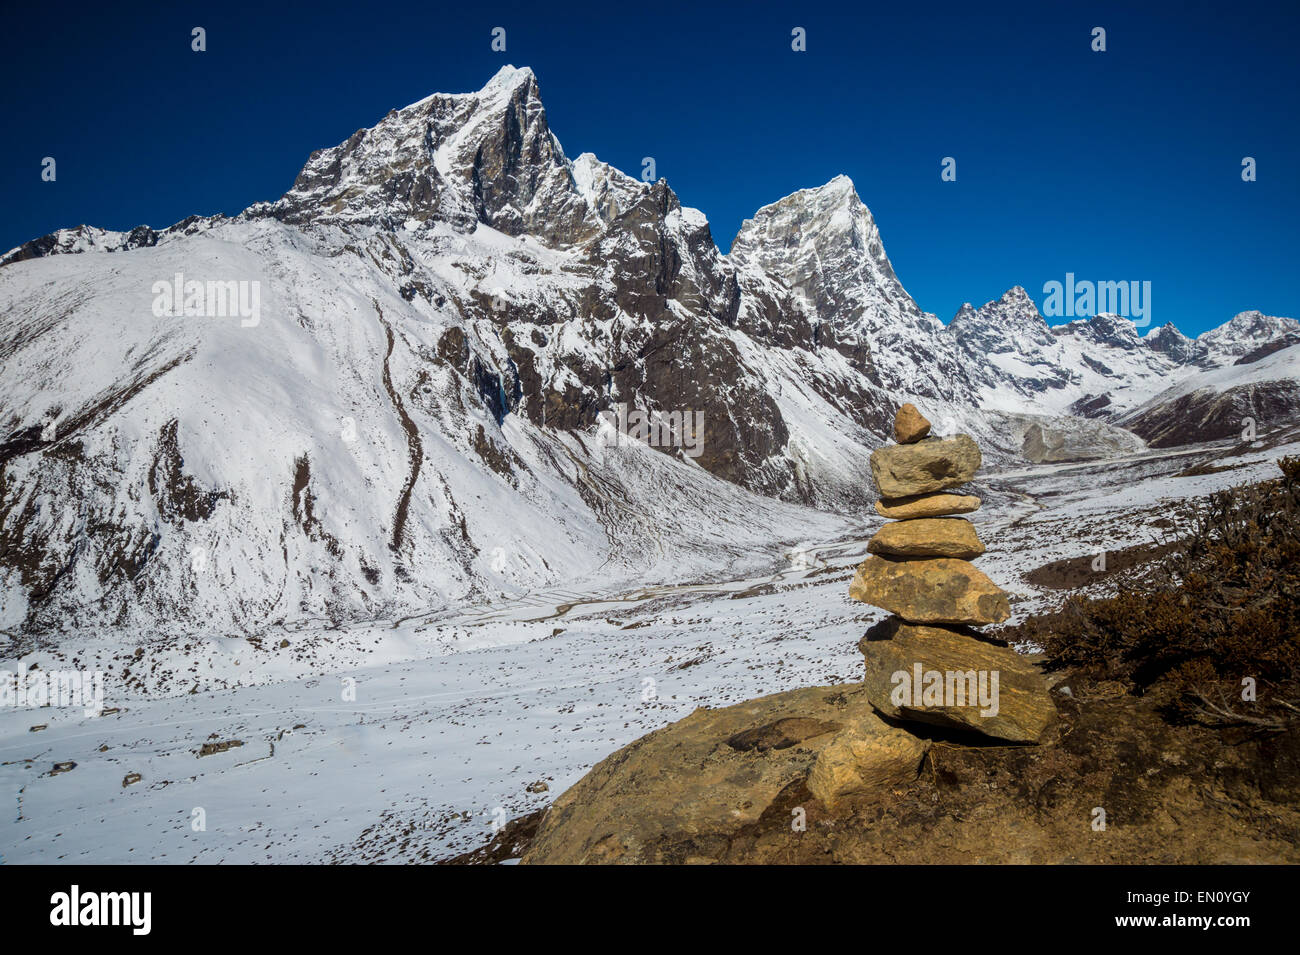 Himalayas mountain landscape with stone tower Stock Photo